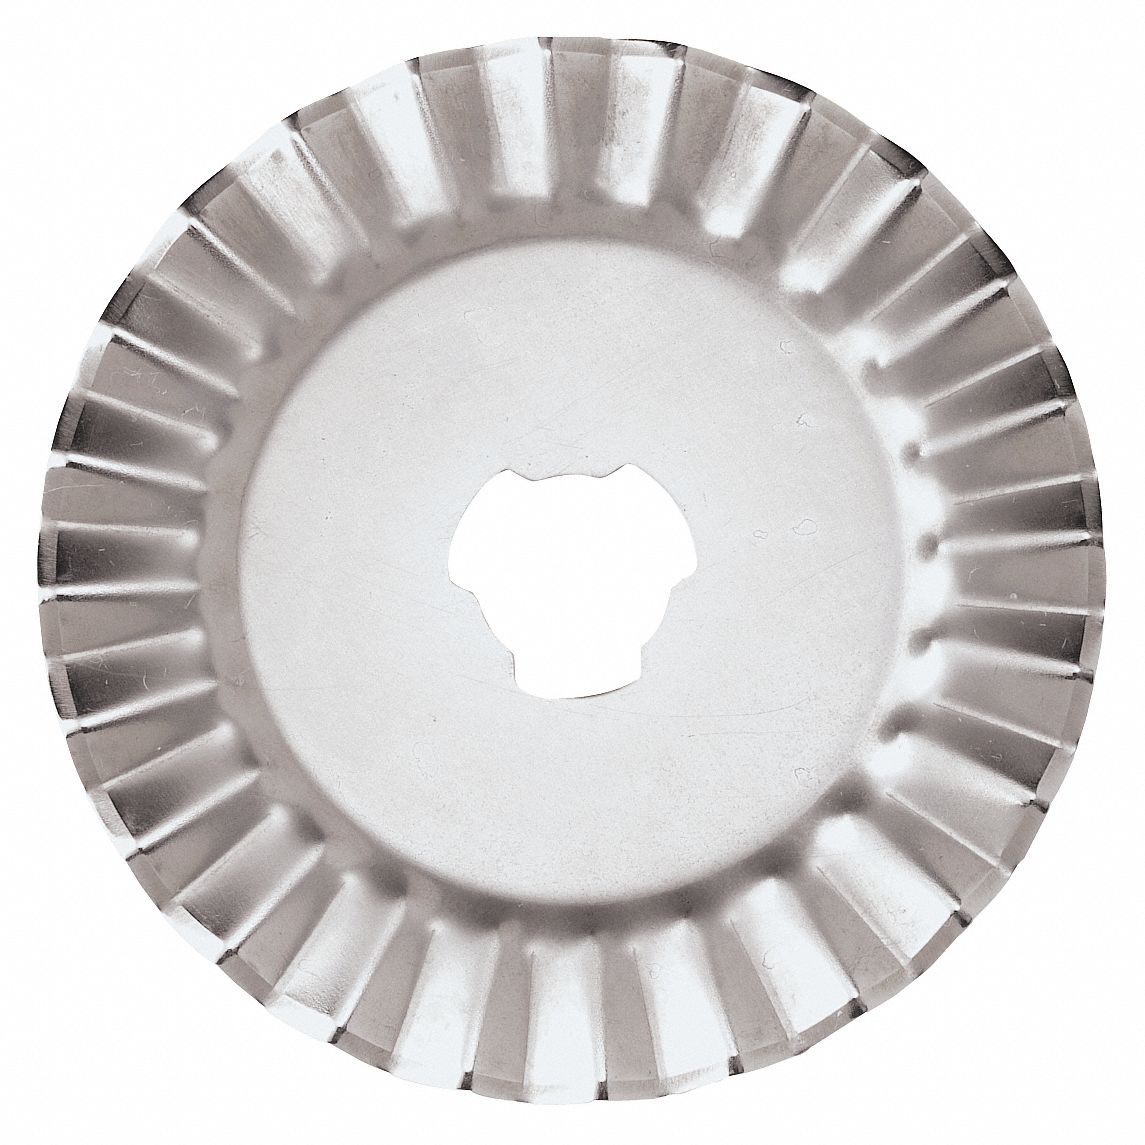 33M299 - Rotary Cutter Blade Pinking 3-3/4 in W